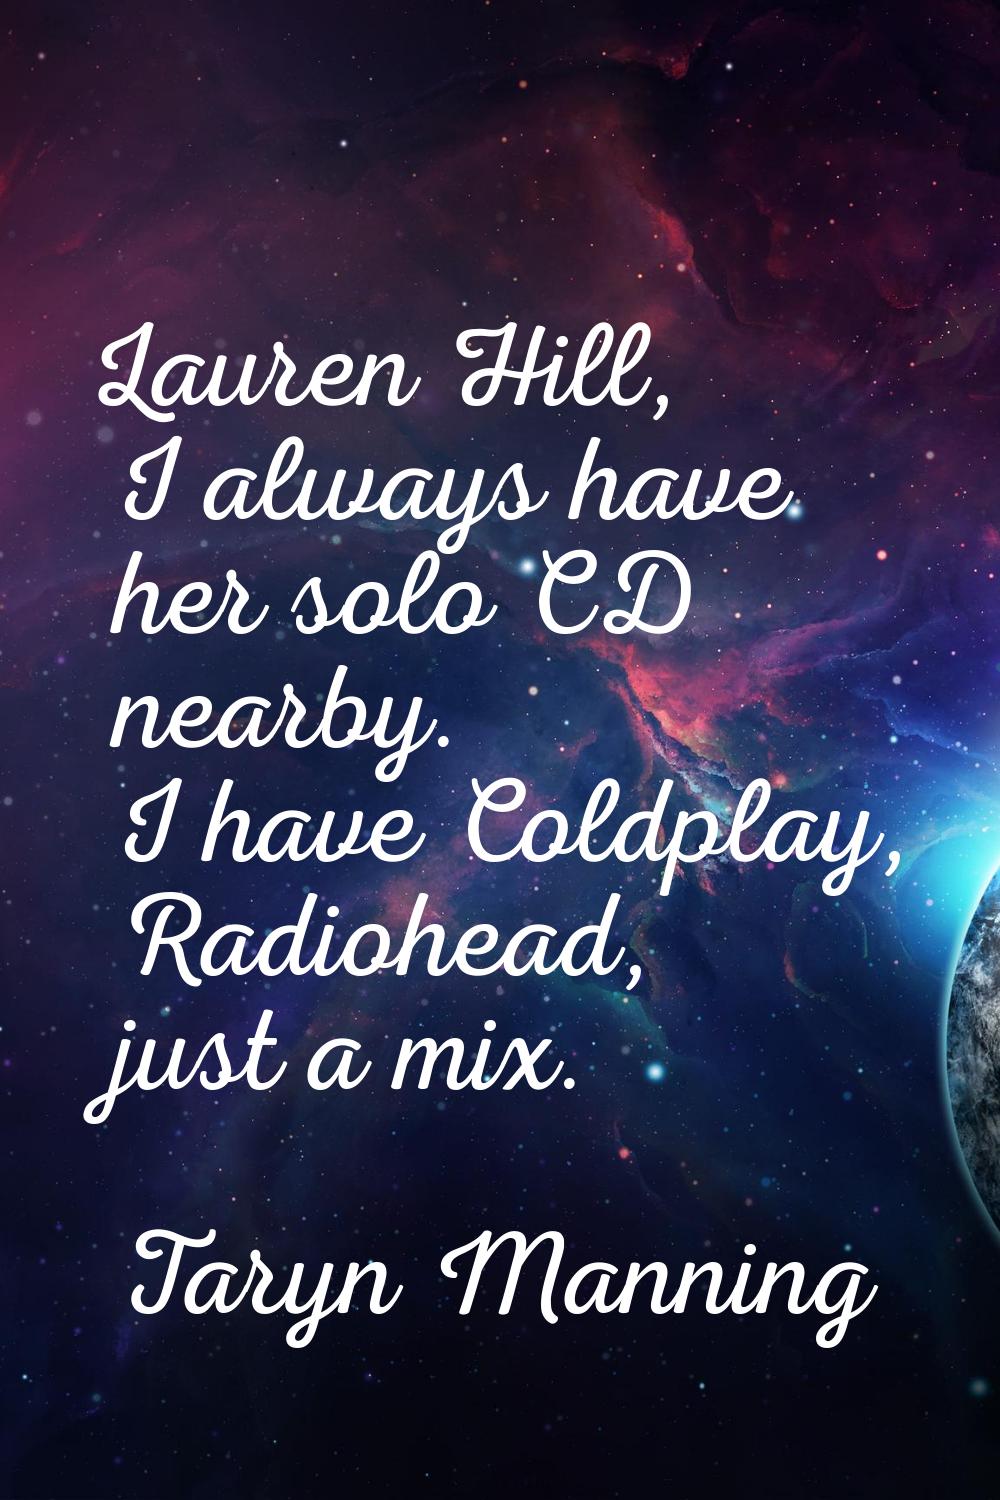 Lauren Hill, I always have her solo CD nearby. I have Coldplay, Radiohead, just a mix.